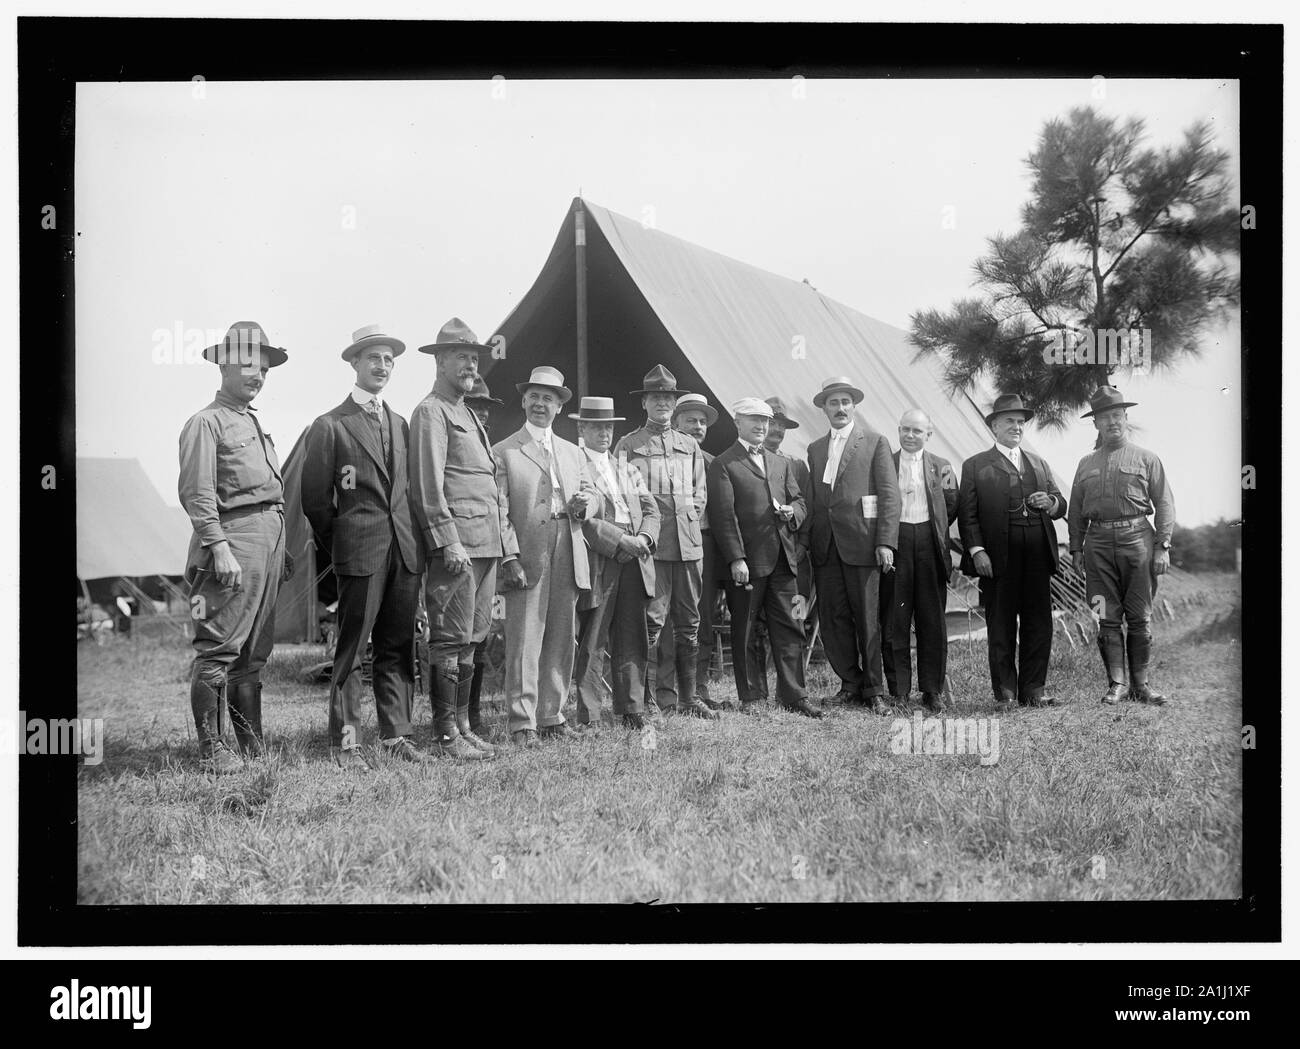 NATIONAL GUARD OF D.C. M. AND M. ASSN. OF D.C. ON VISIT TO D.C.N.G. IN CAMP AT COLONIAL BEACH. FRONT: BOB FEATHERSTONE; UNIDENTIFIED; COL. WILLIAM E. HARVEY; ROSS P. ANDREWS; UNIDENTIFIED; ANTON STEPHAN; C.J. COLUMBUS; RICHARD L. LAMB; M.A. LEASE; UNIDENTIFIED; HARRY COOPE.; 3 IN REAR UNIDENTIFIED Stock Photo